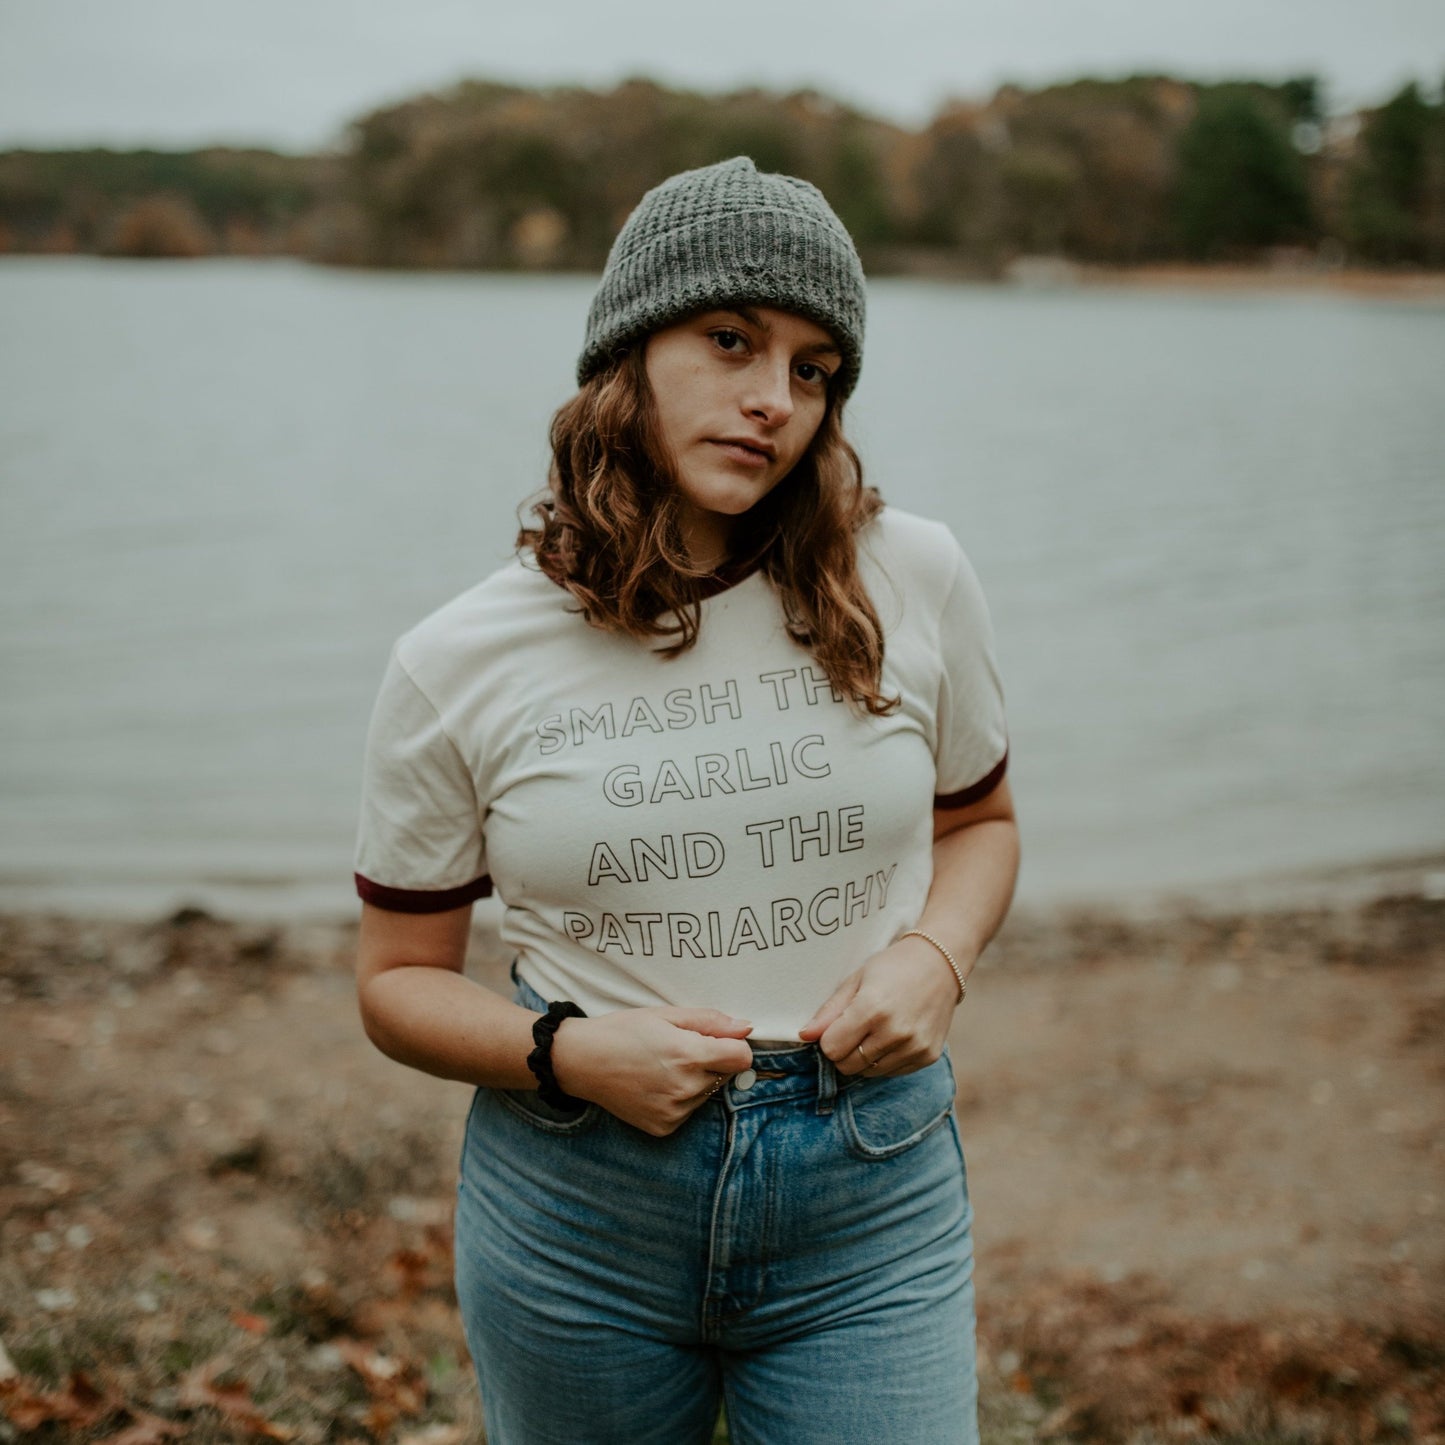 A woman wears a "Smash the Garlic and the Patriarchy" ringer tee with jeans and a gray beanie